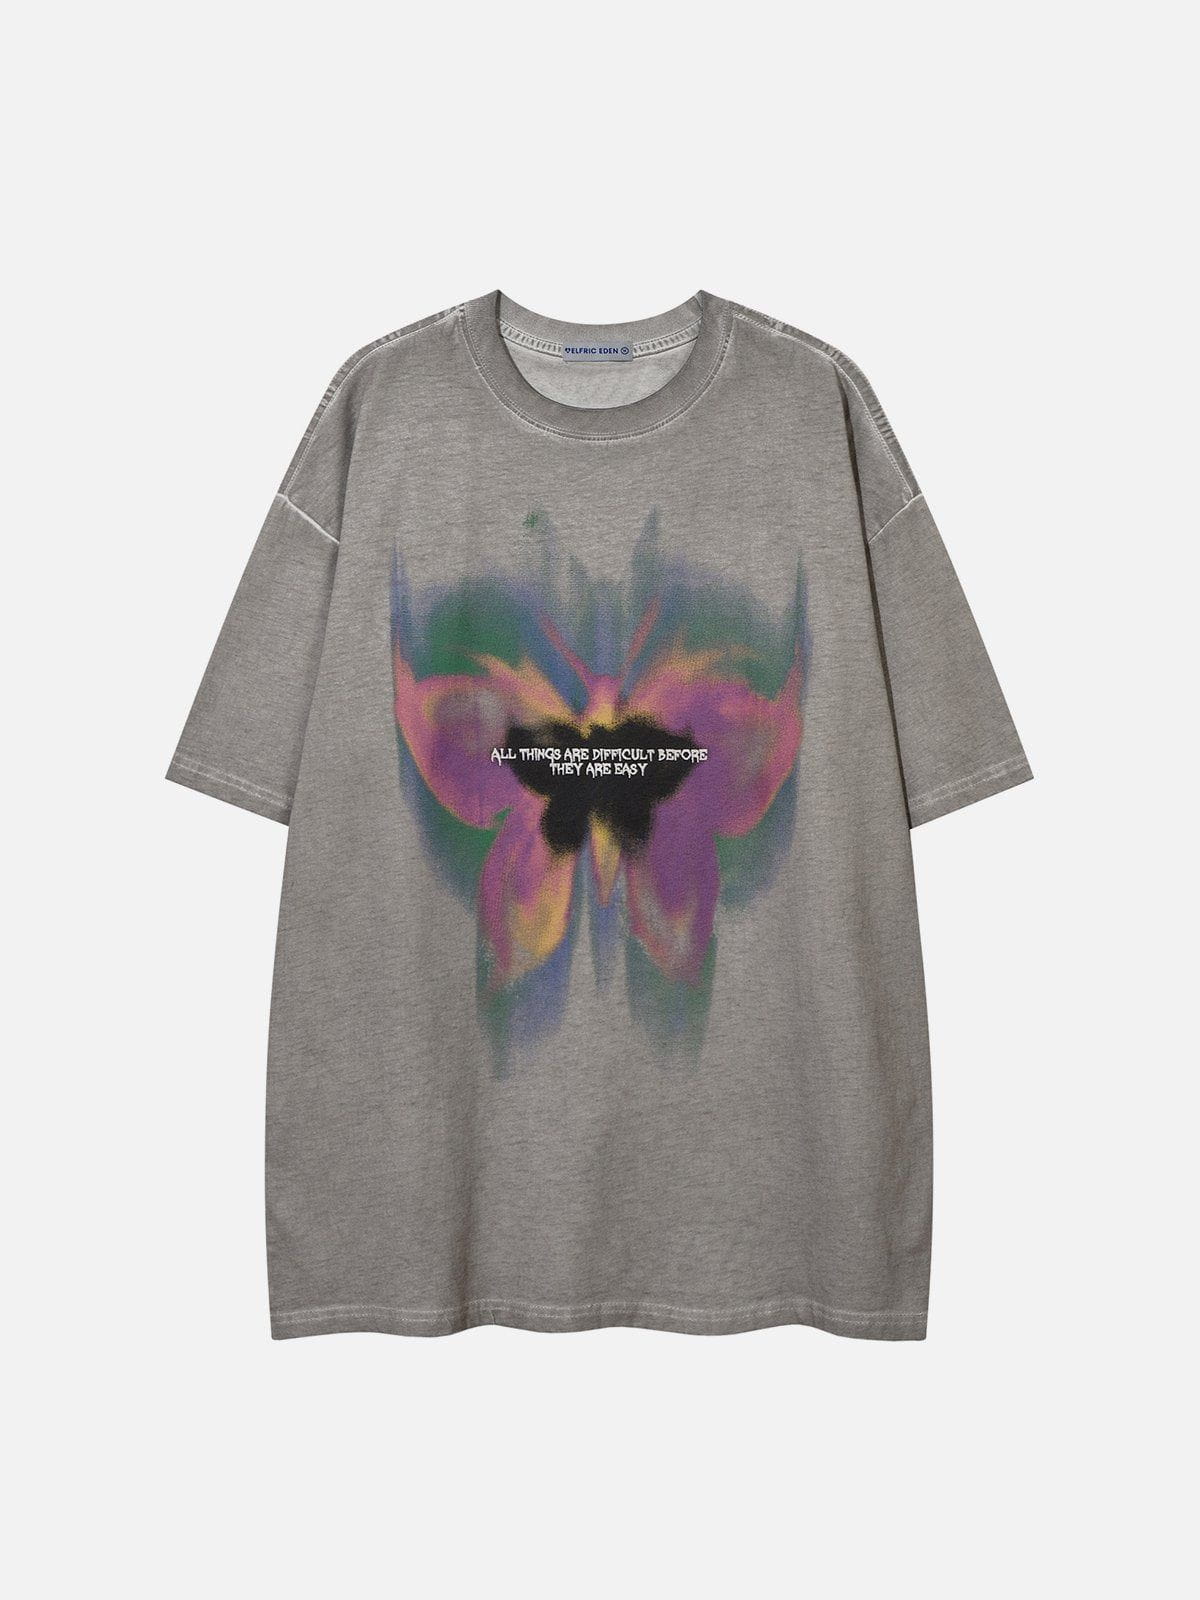 Aelfric Eden Blurring Butterfly Washed Tee